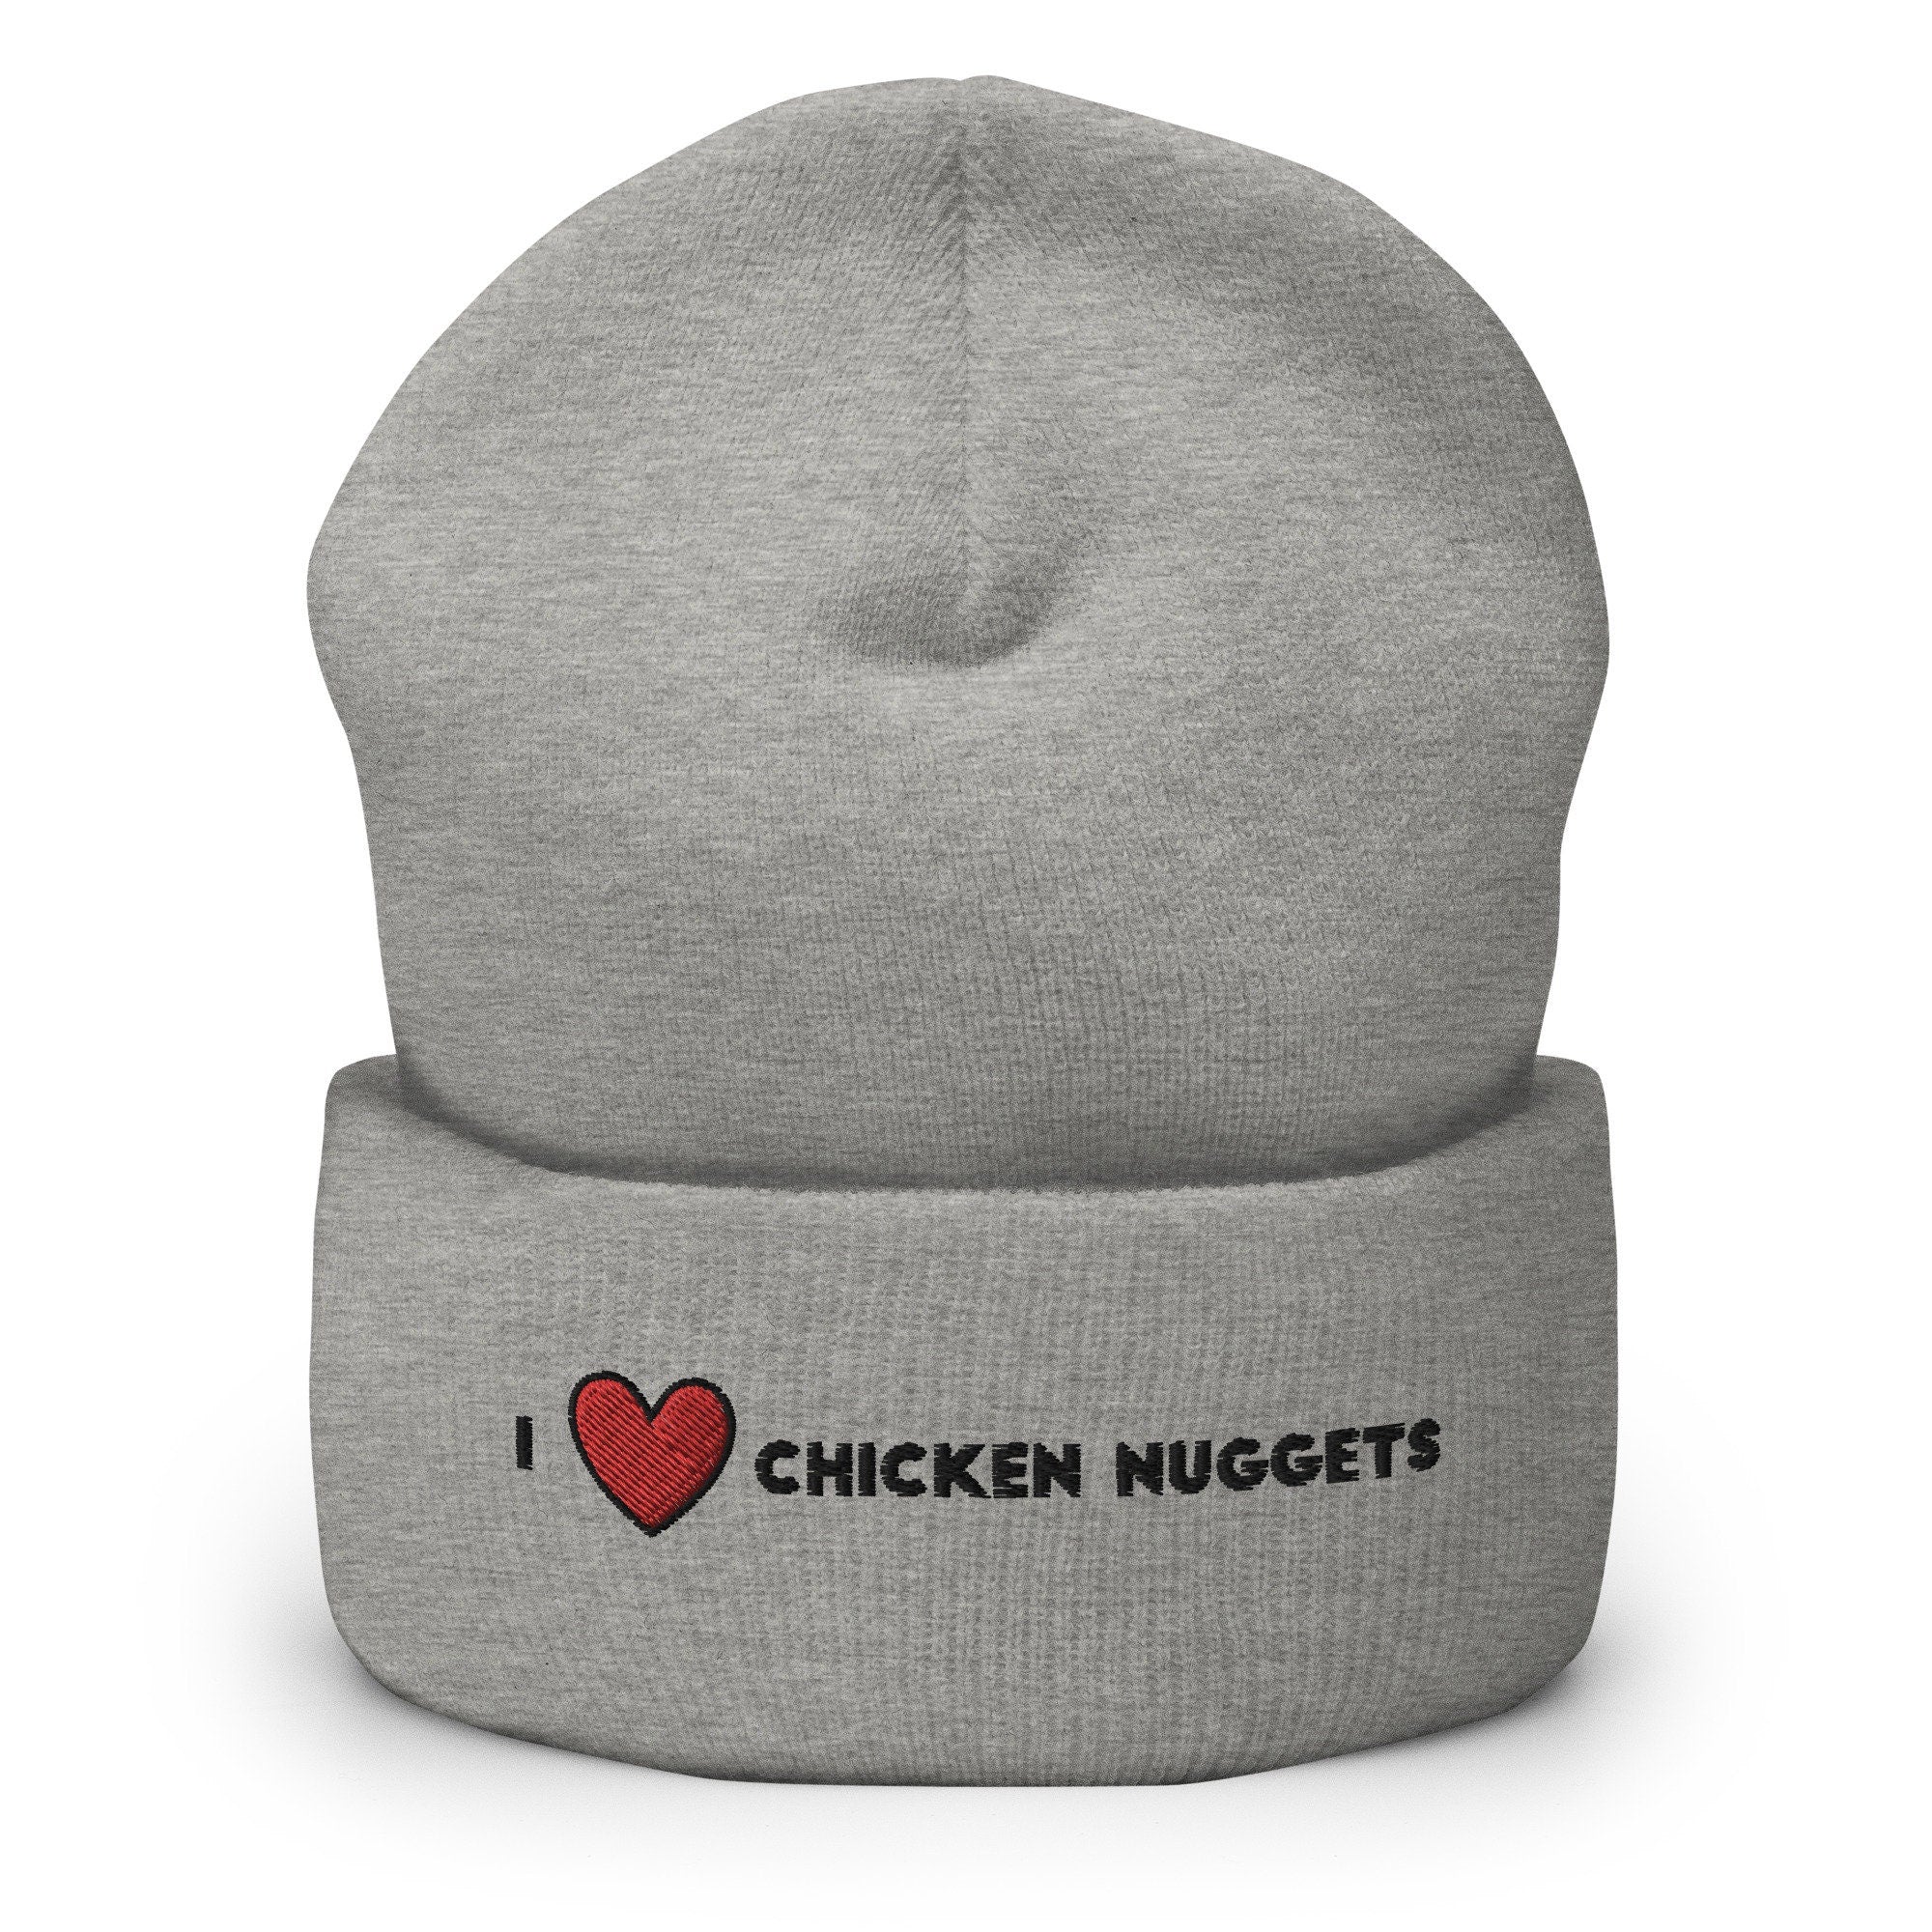 I Heart Chicken Nuggets Embroidered Beanie, Handmade Cuffed Knit Unisex Slouchy Adult Winter Hat Cap Gift